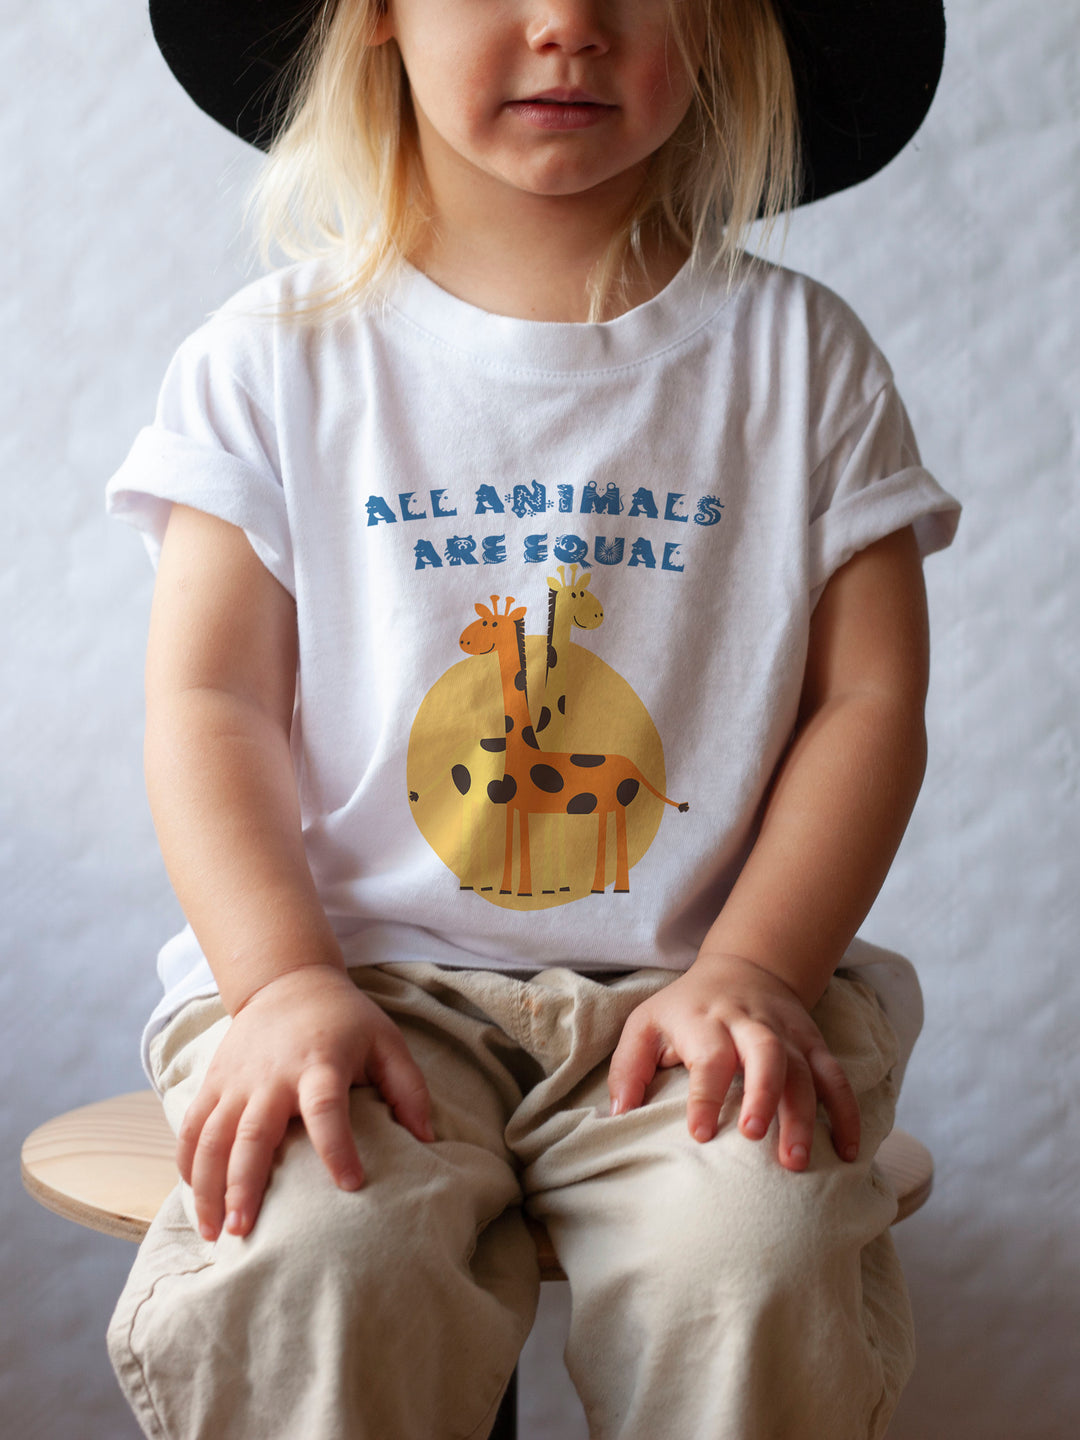 All Animals Are Equal. Short Sleeve T Shirt For Toddler And Kids. - TeesForToddlersandKids -  t-shirt - seasons, summer - all-animals-are-equal-short-sleeve-t-shirt-for-toddler-and-kids